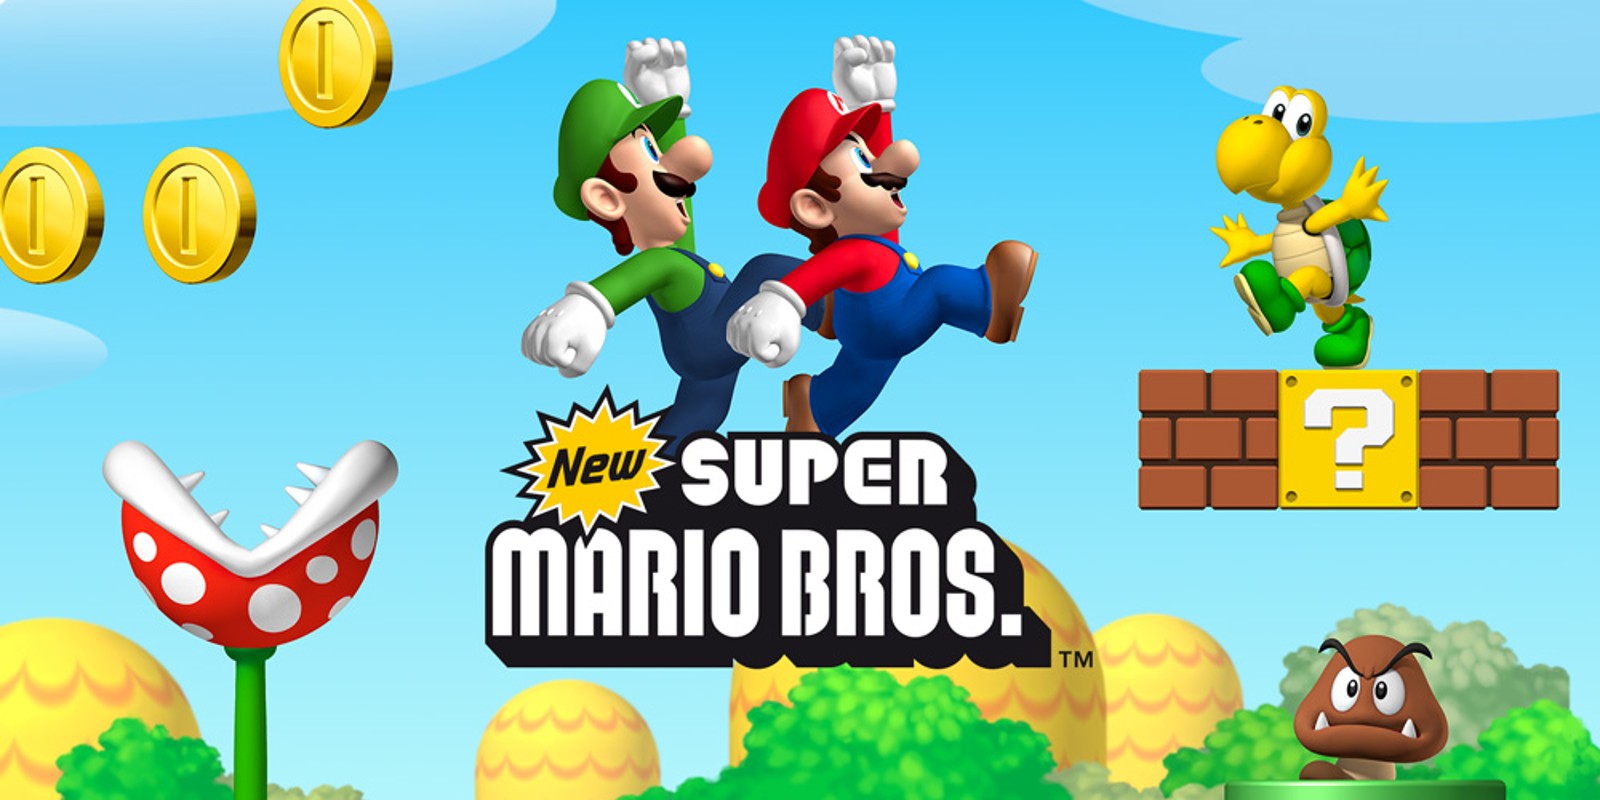 Detail Images Of Super Mario Brothers Nomer 8